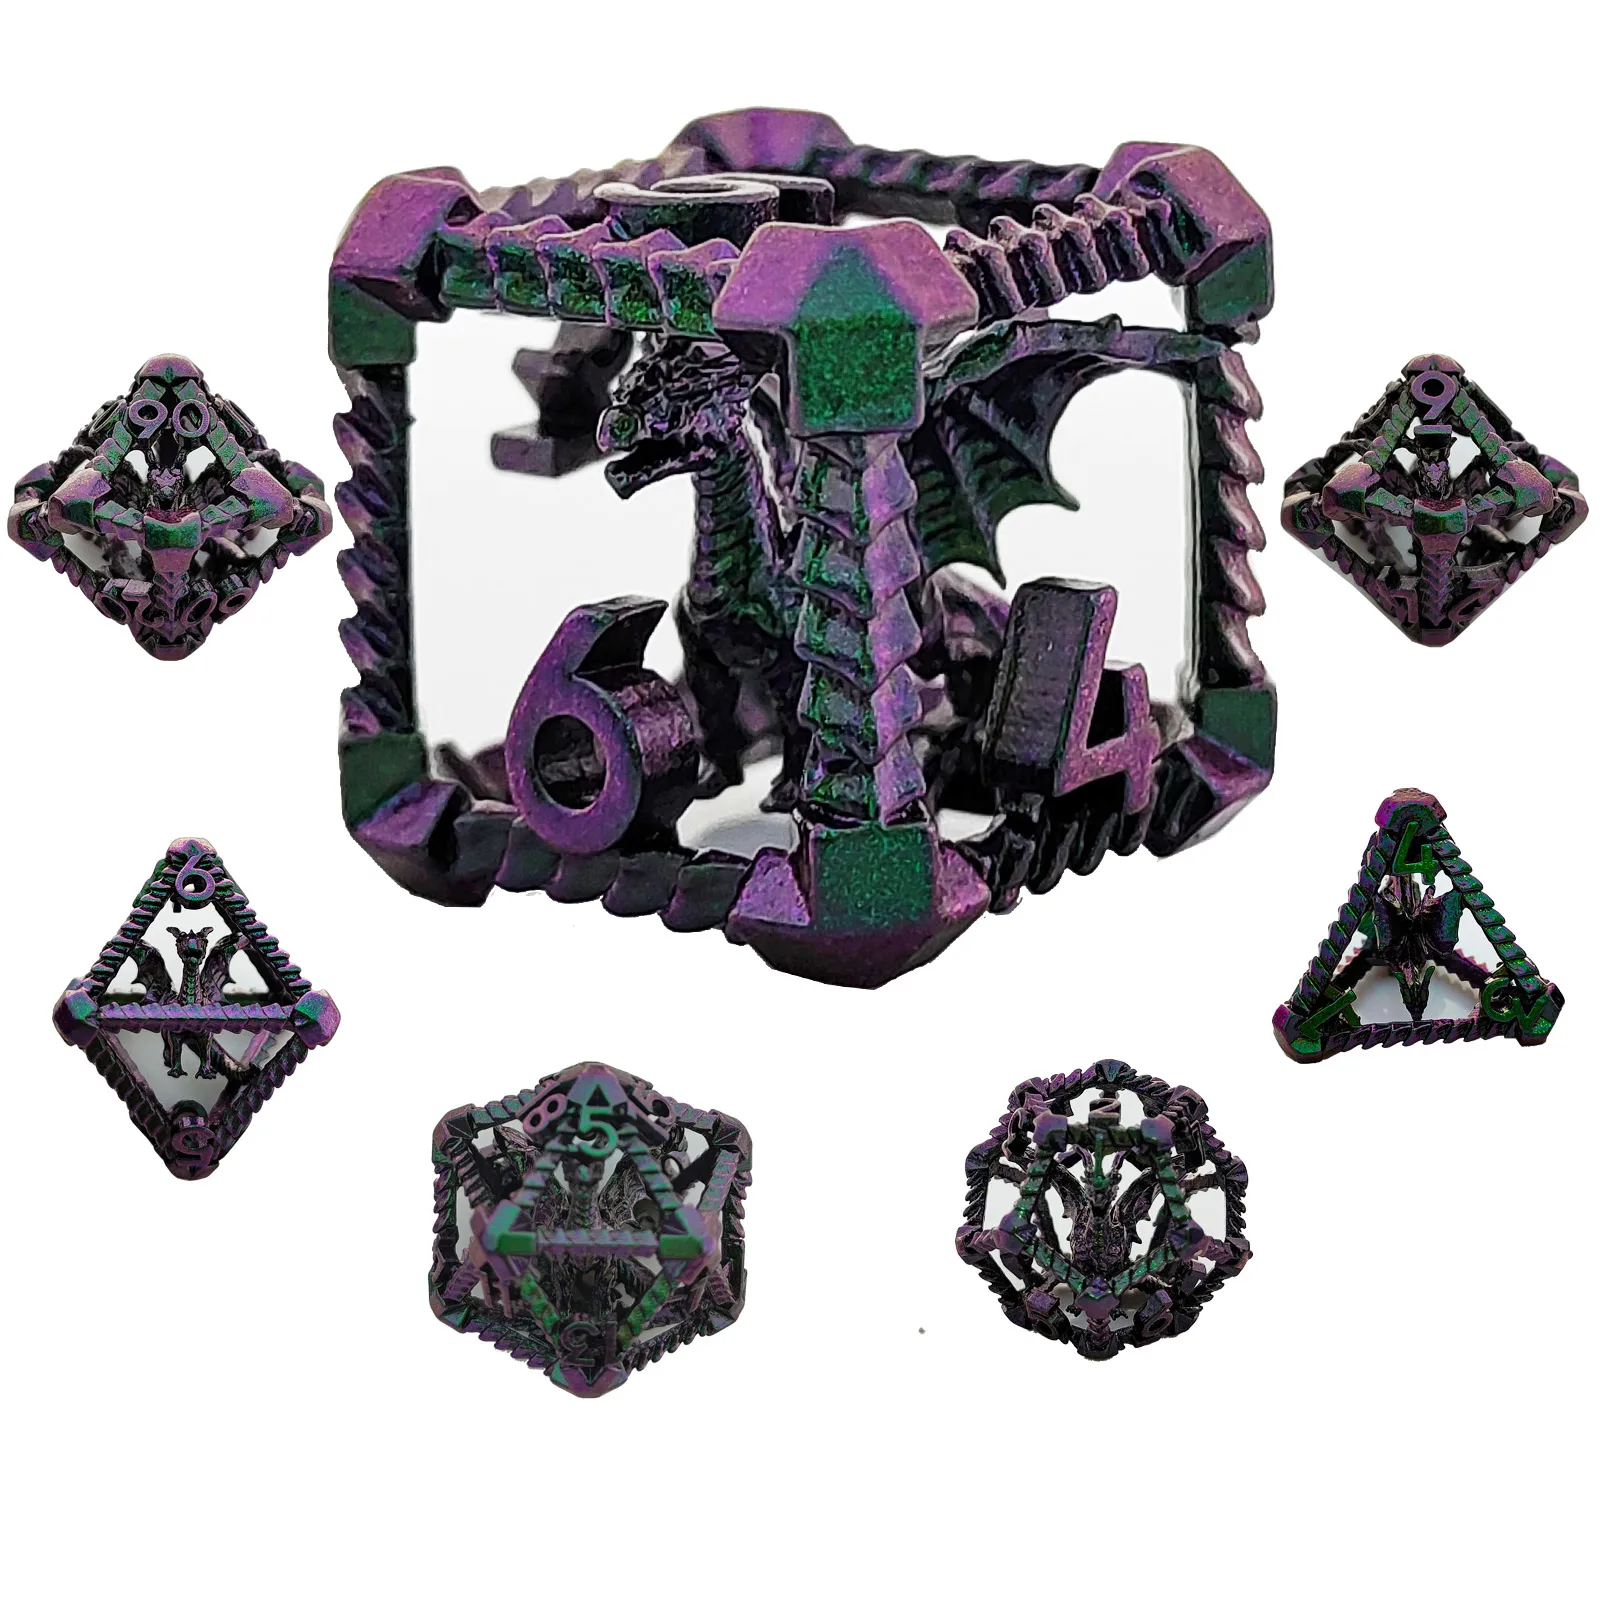 DND Hollow Metal Giant Polyhedral Dragon Dice 7-Piece Set for Roleplaying Tabletop Games Halloween Party Accessories Christmas G polyhedral metal dice set of 7 with black bag for rpg dnd mtg games ancient